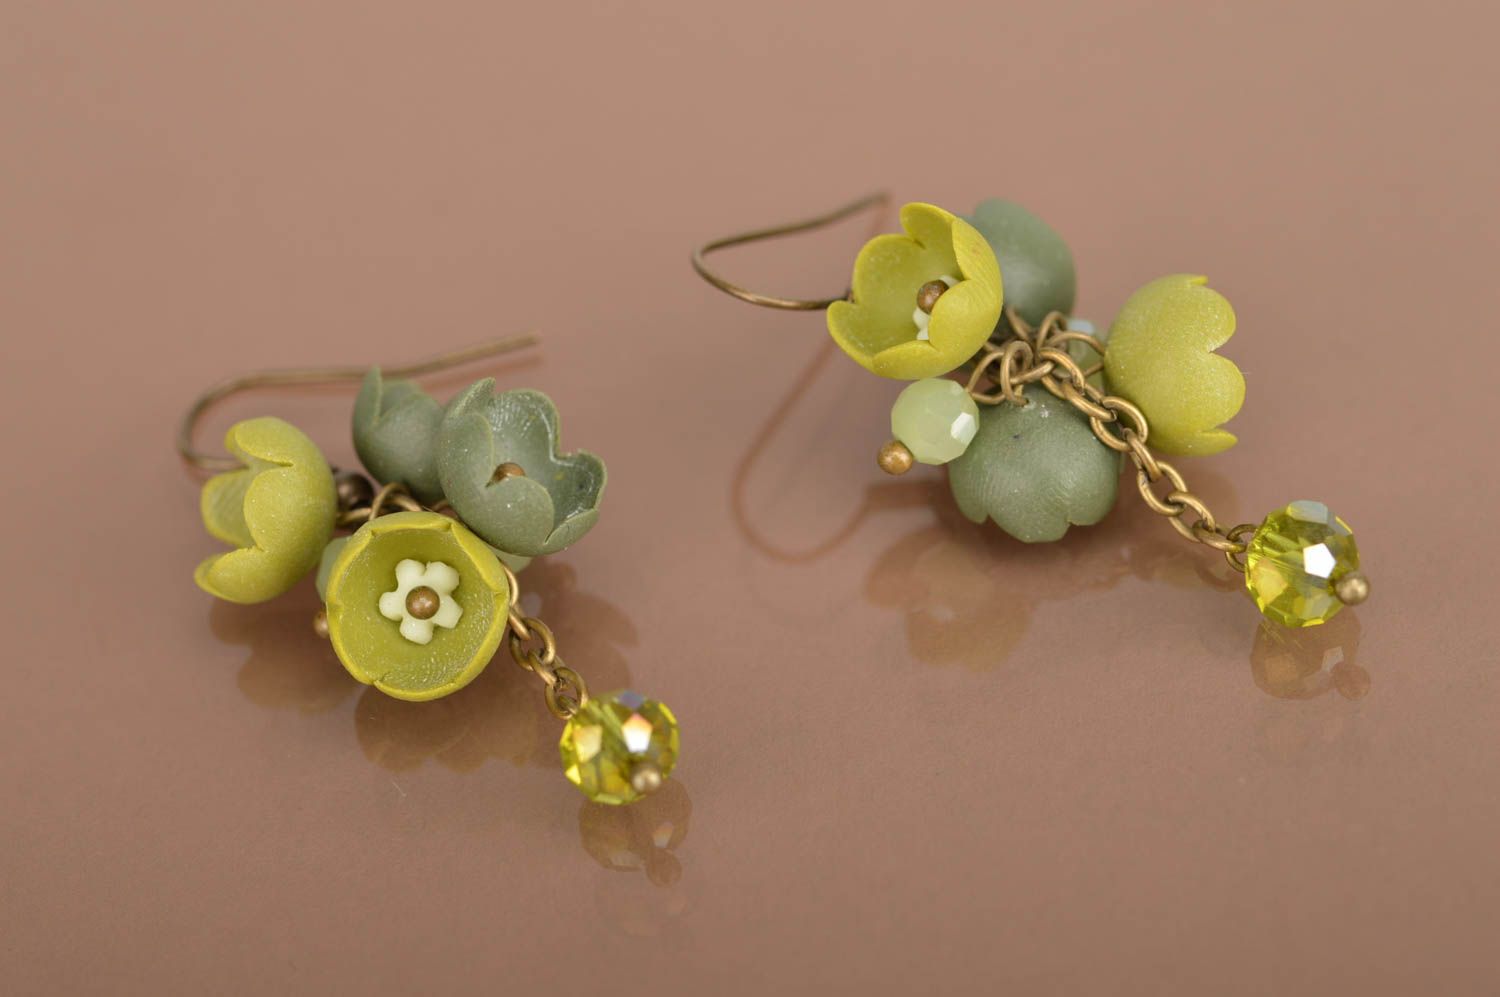 Stylish handmade polymer clay earrings plastic flower earrings gifts for her photo 2